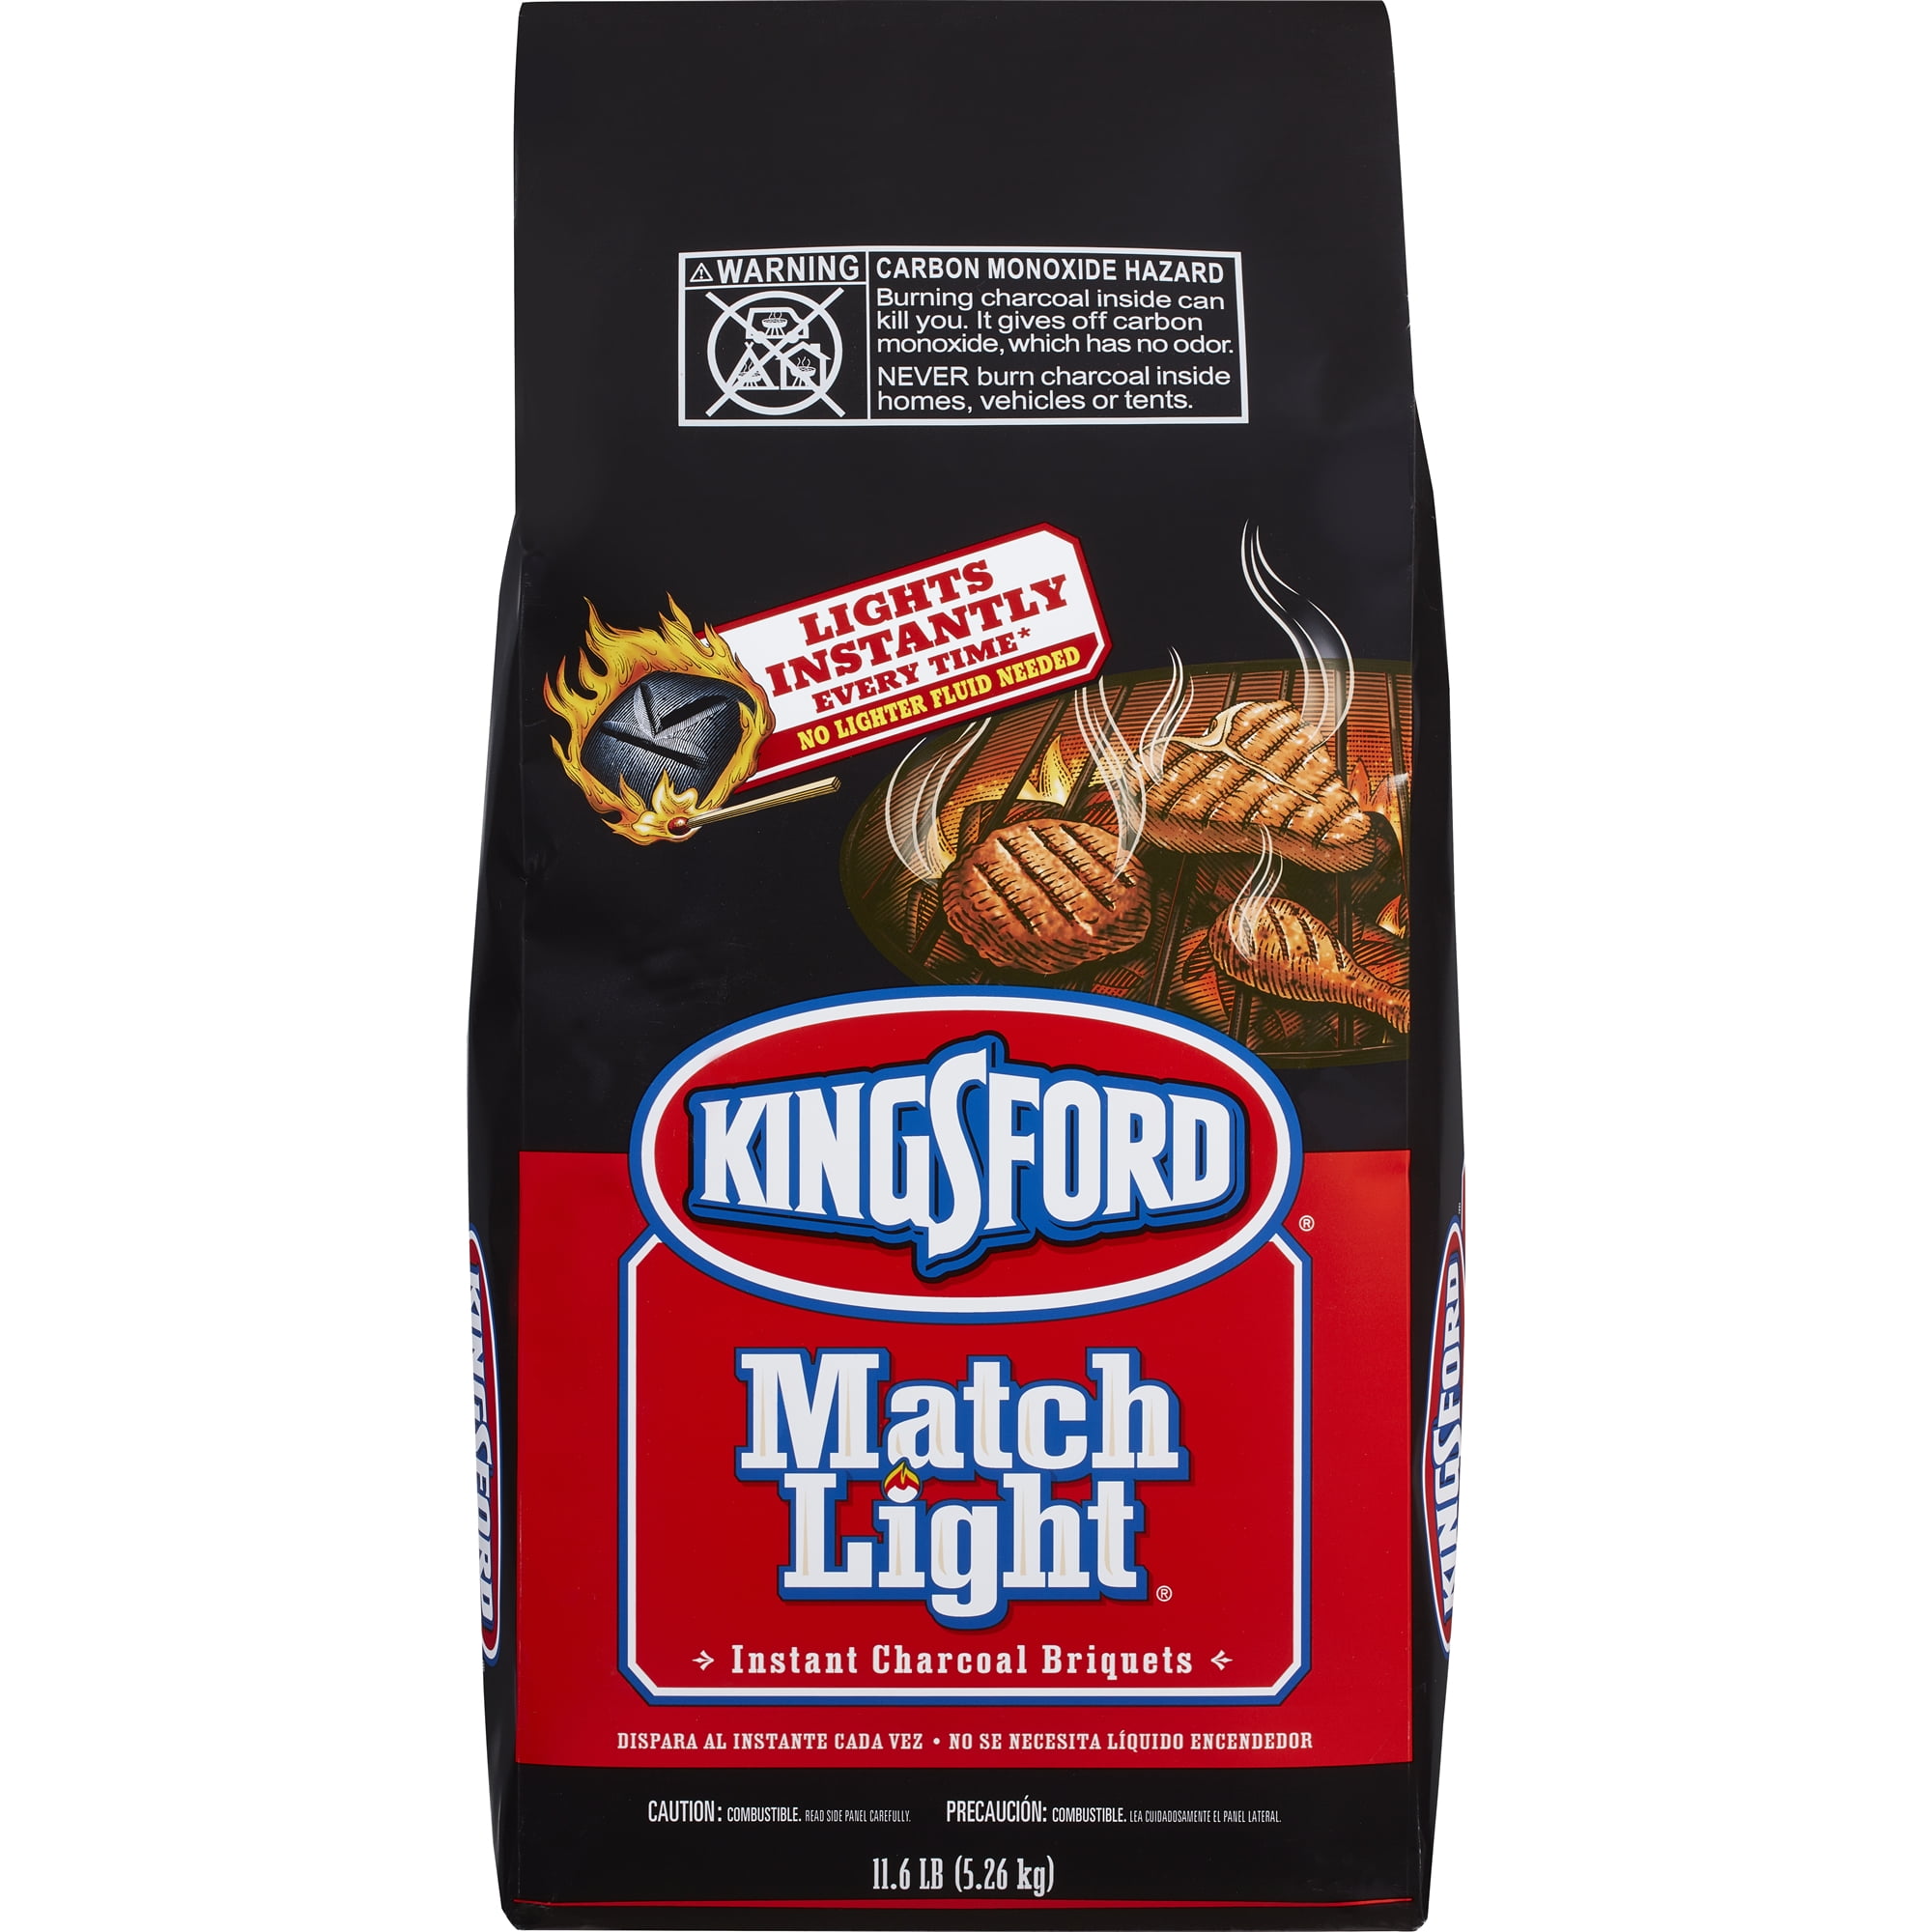 11.6 lbs Kingsford Match Light Charcoal Briquettes PACK OF 4 